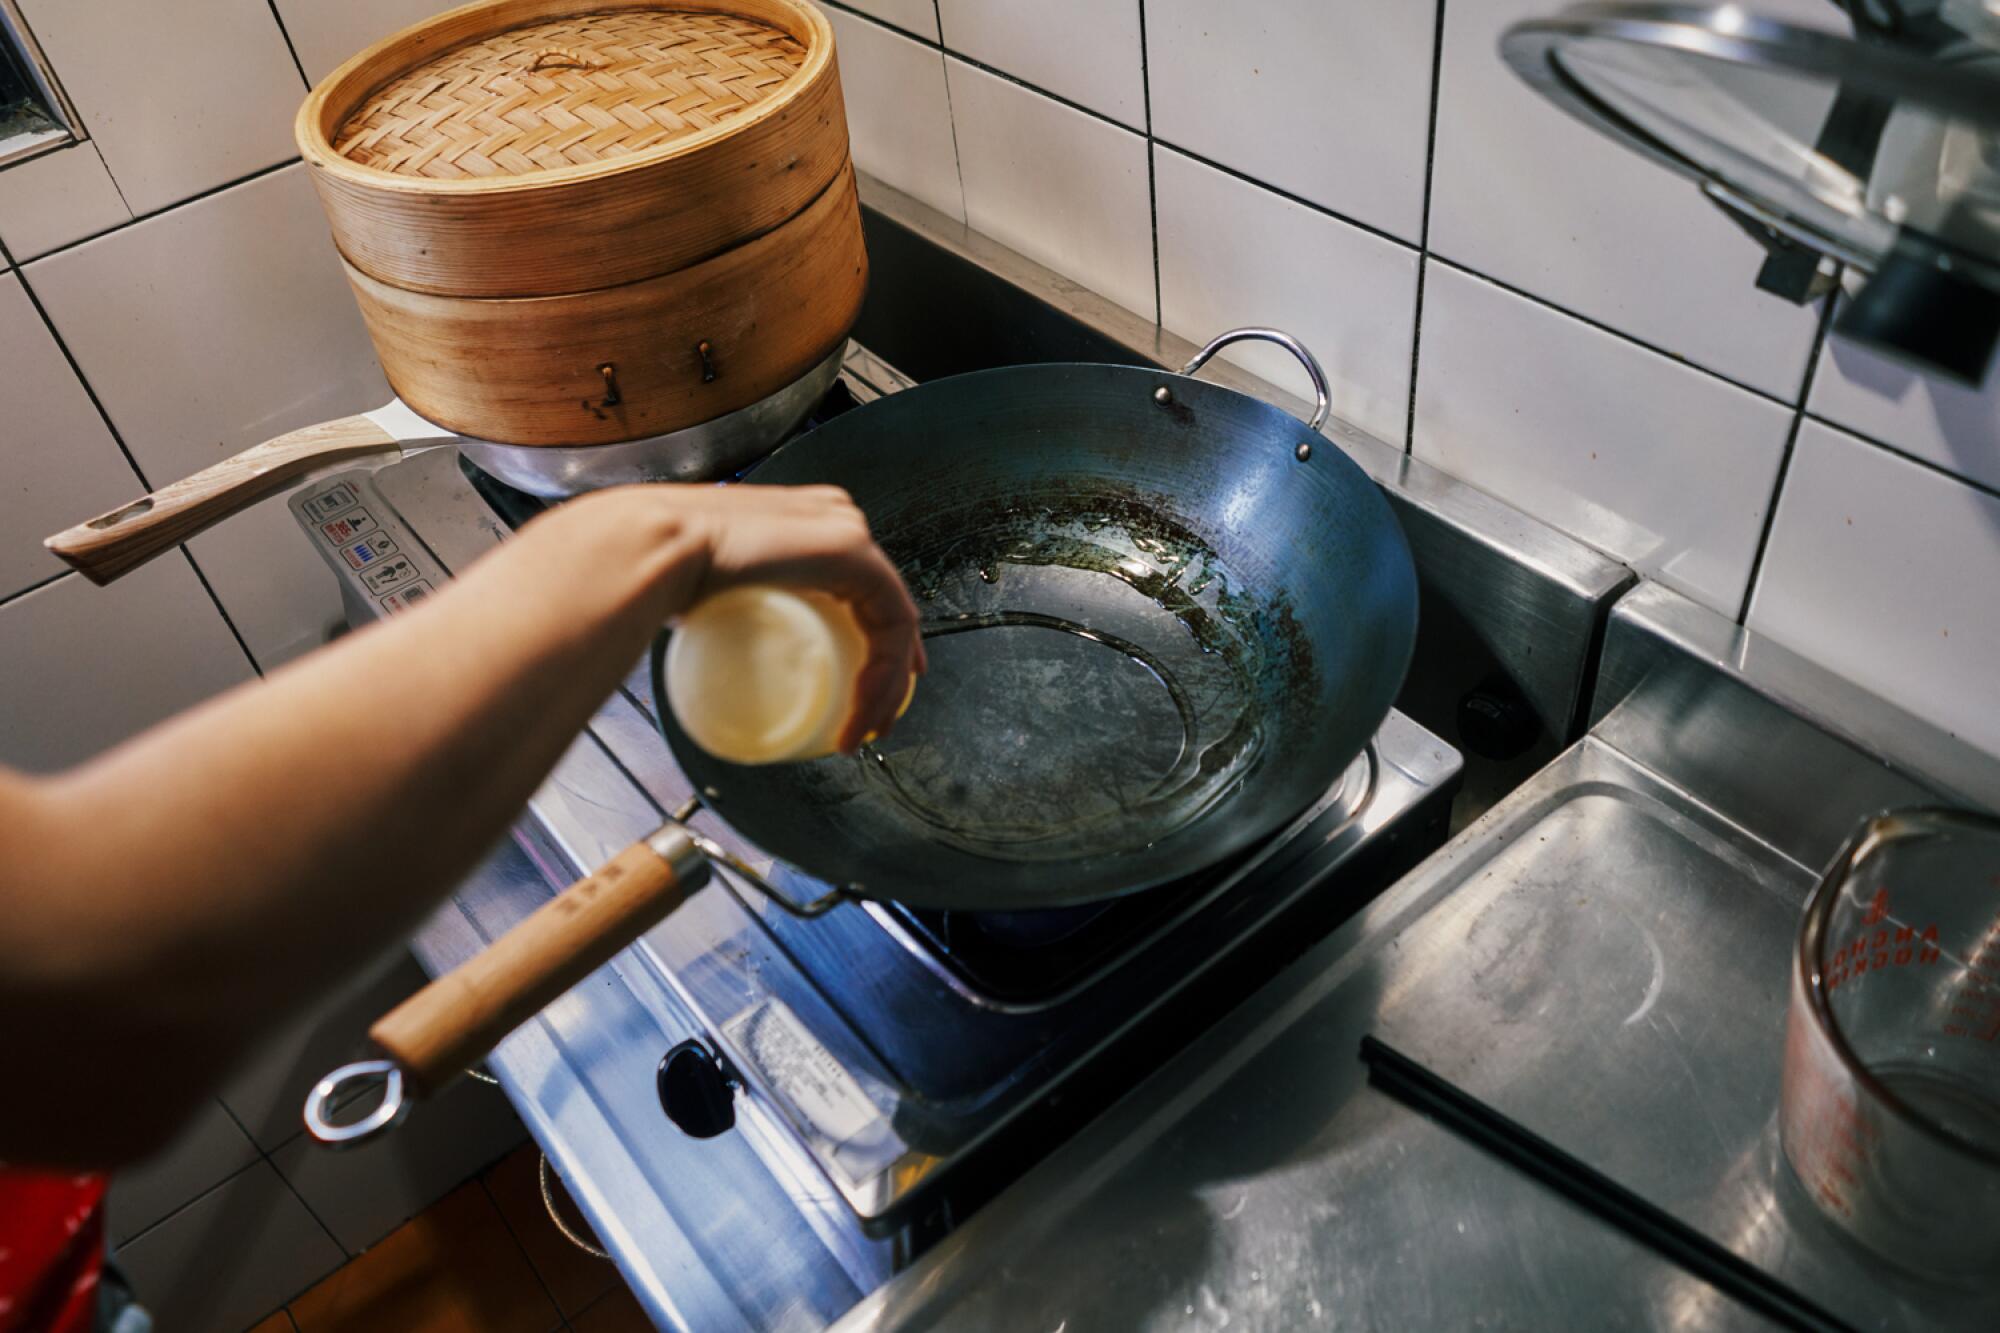 Heating oil in a wok in a tiled kitchen.